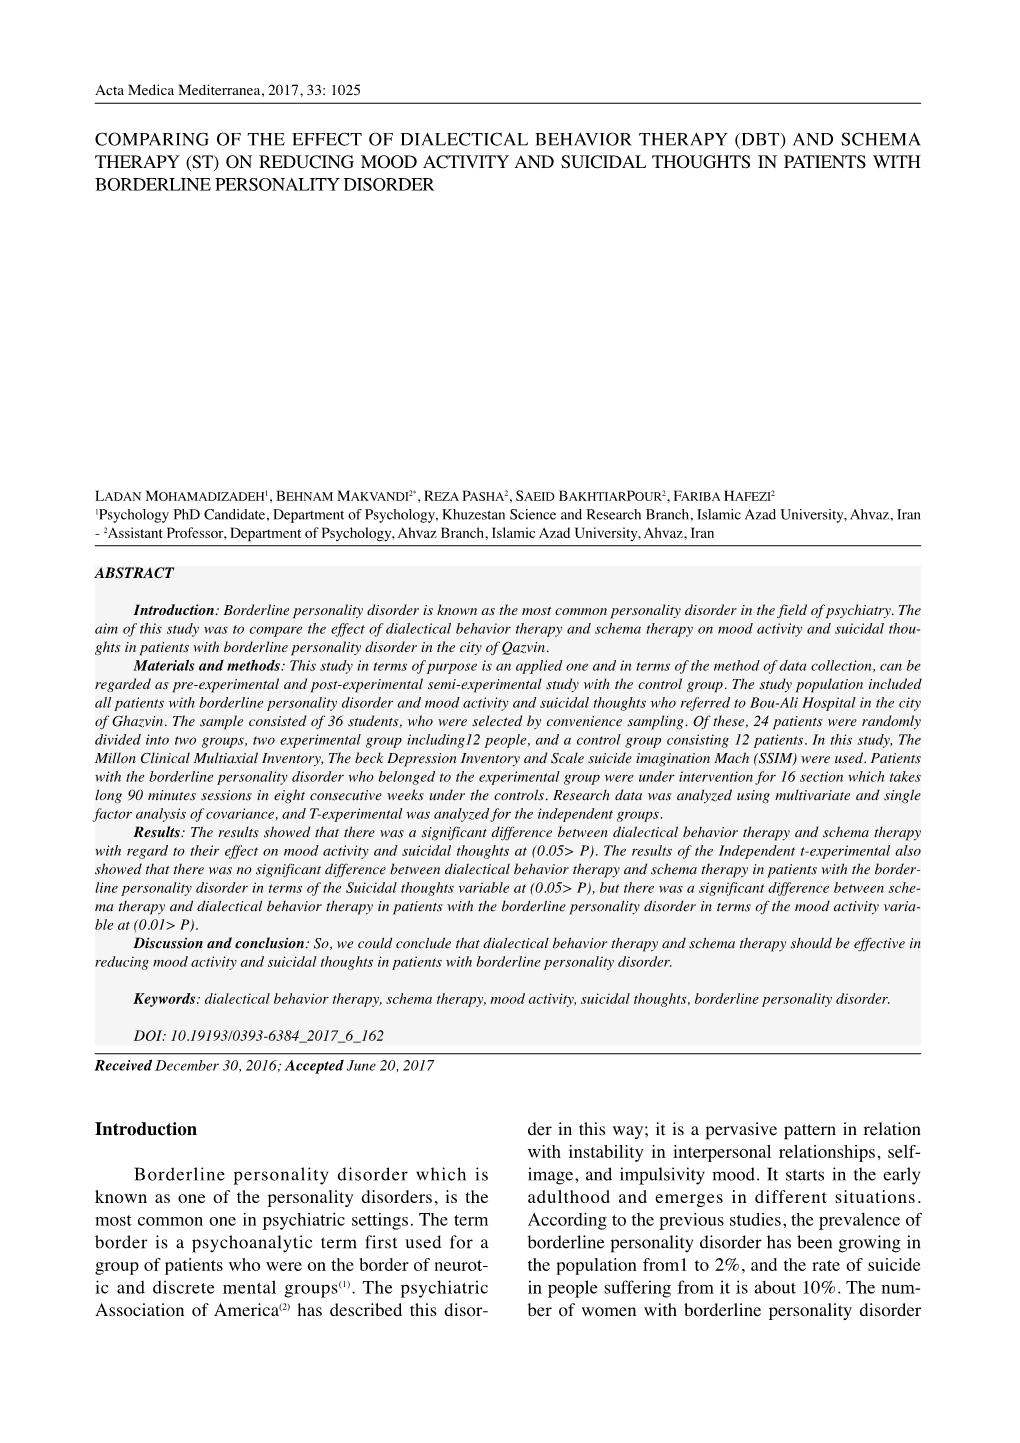 (Dbt) and Schema Therapy (St) on Reducing Mood Activity and Suicidal Thoughts in Patients with Borderline Personality Disorder